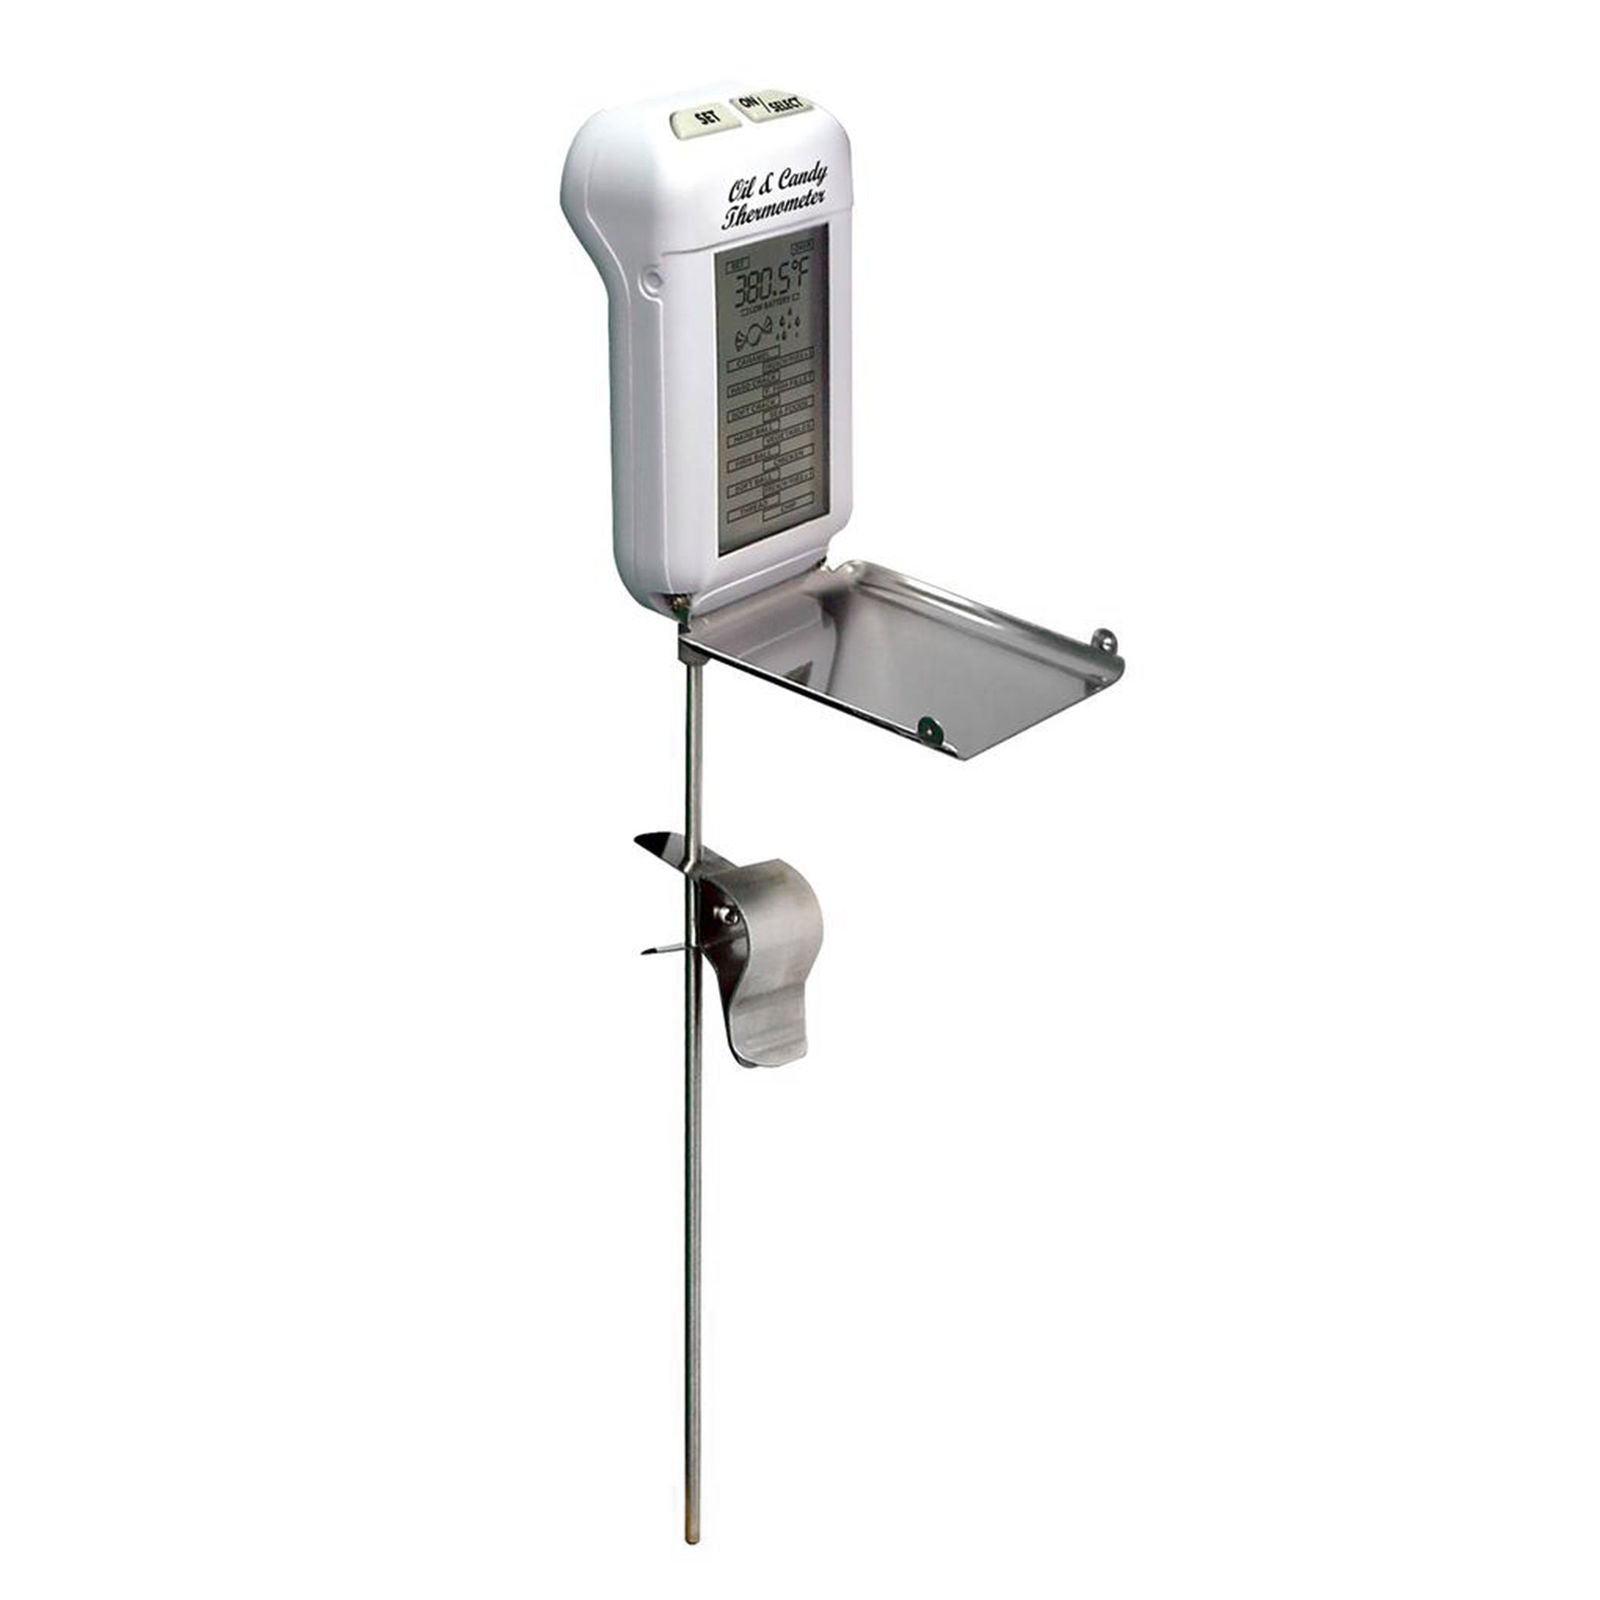 Digital Candy Thermometer w/10" Stem